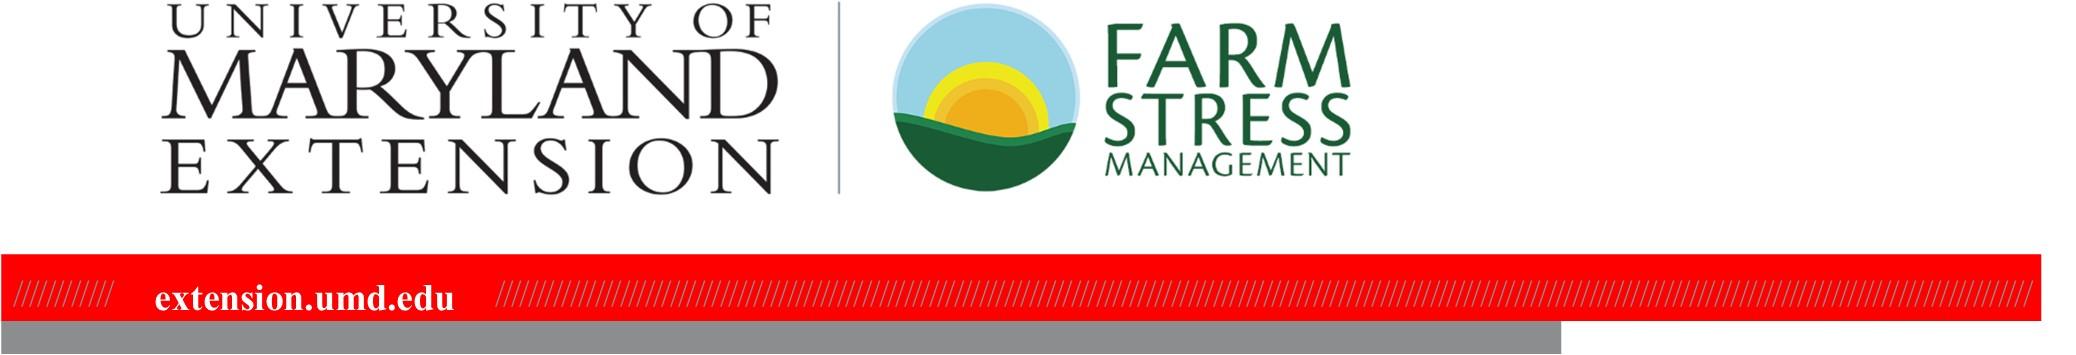 Publication header with UME and Farm Stress logos